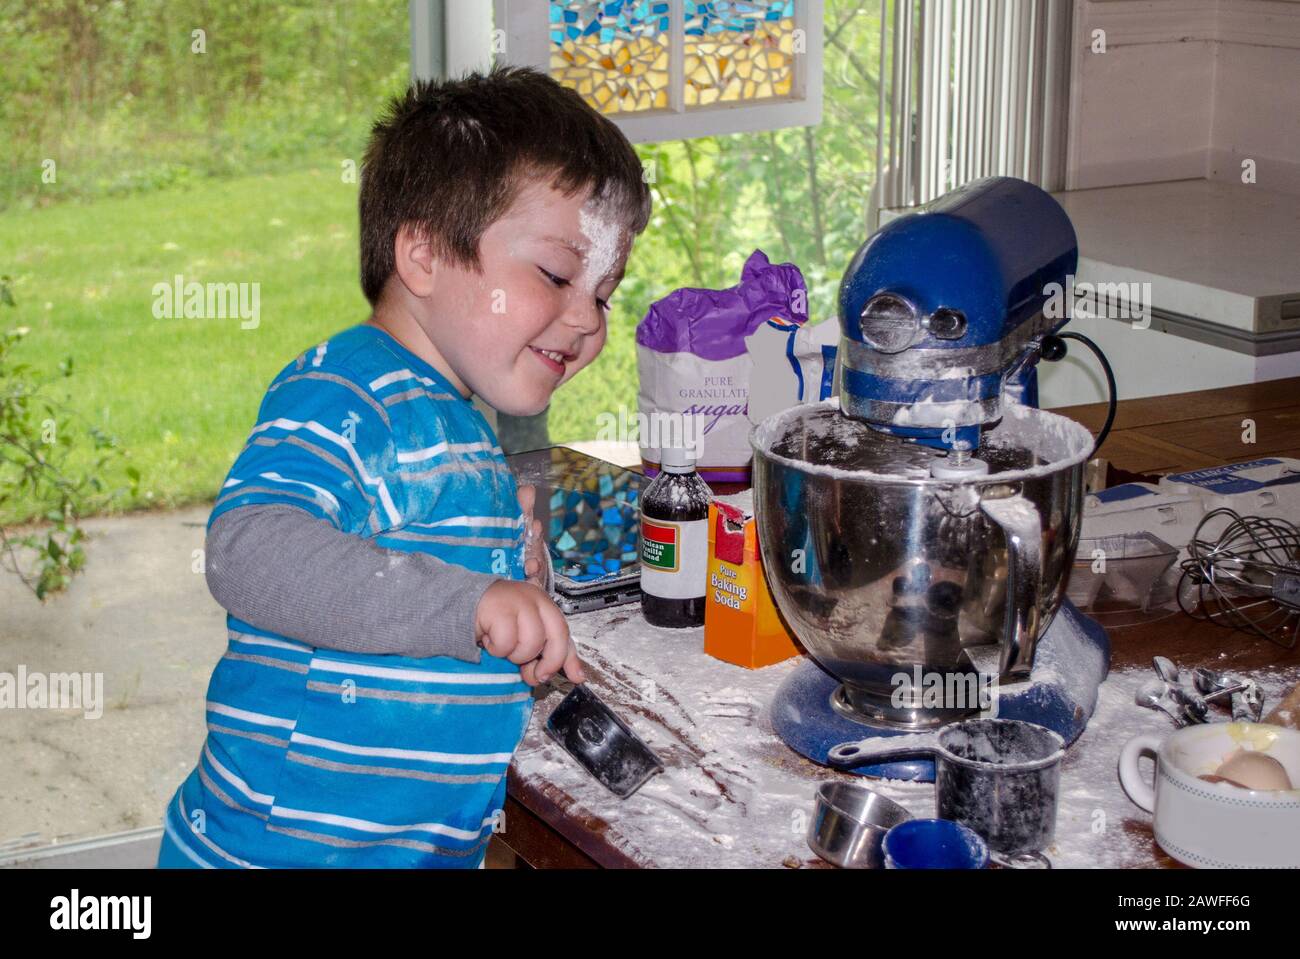 A cute little boy covered in flour makes cookies in grandma's kitchen Stock Photo